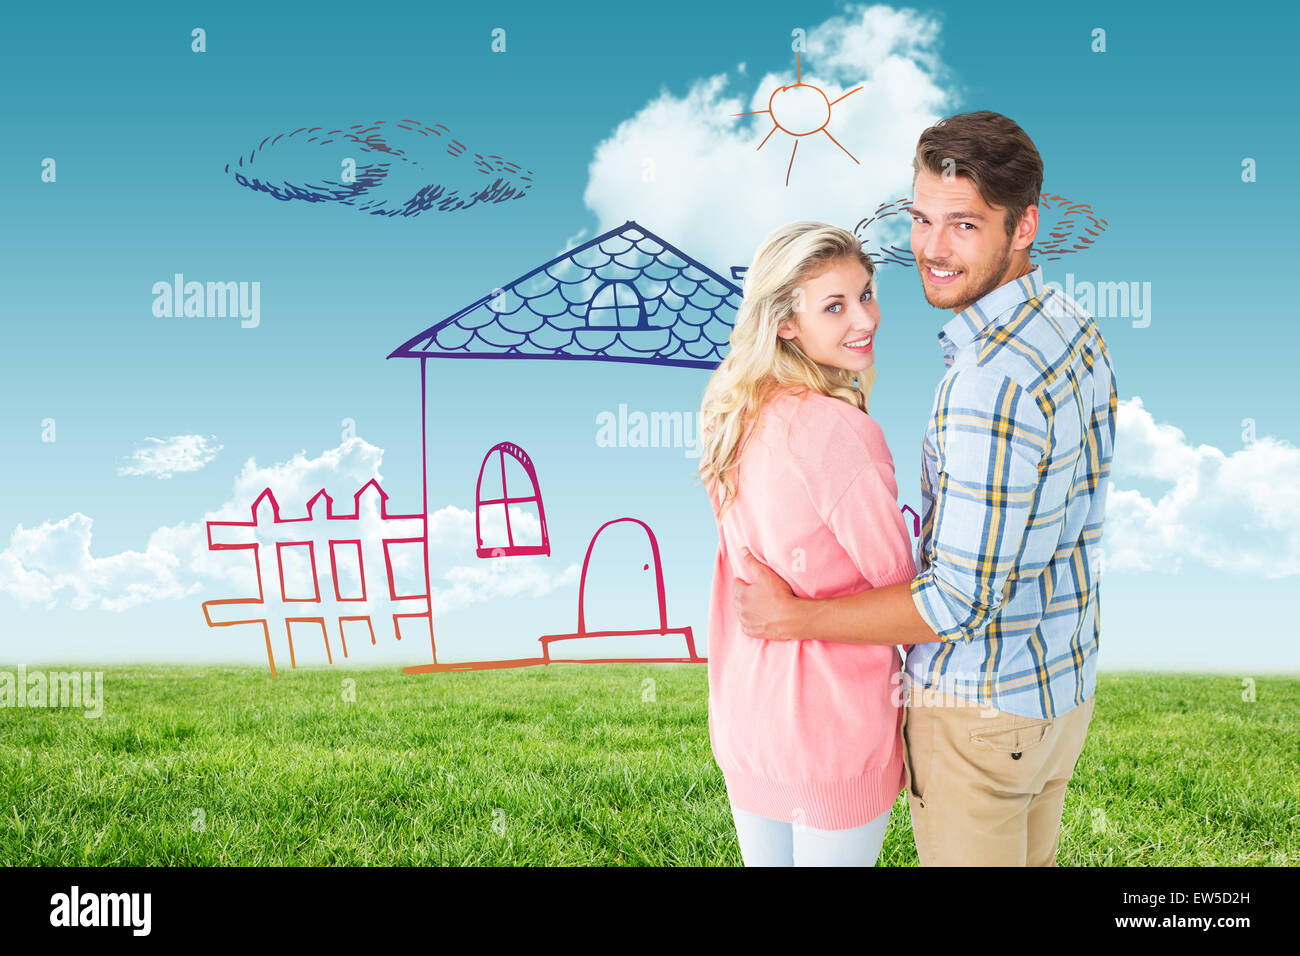 Composite image of attractive couple turning and smiling at camera Stock Photo